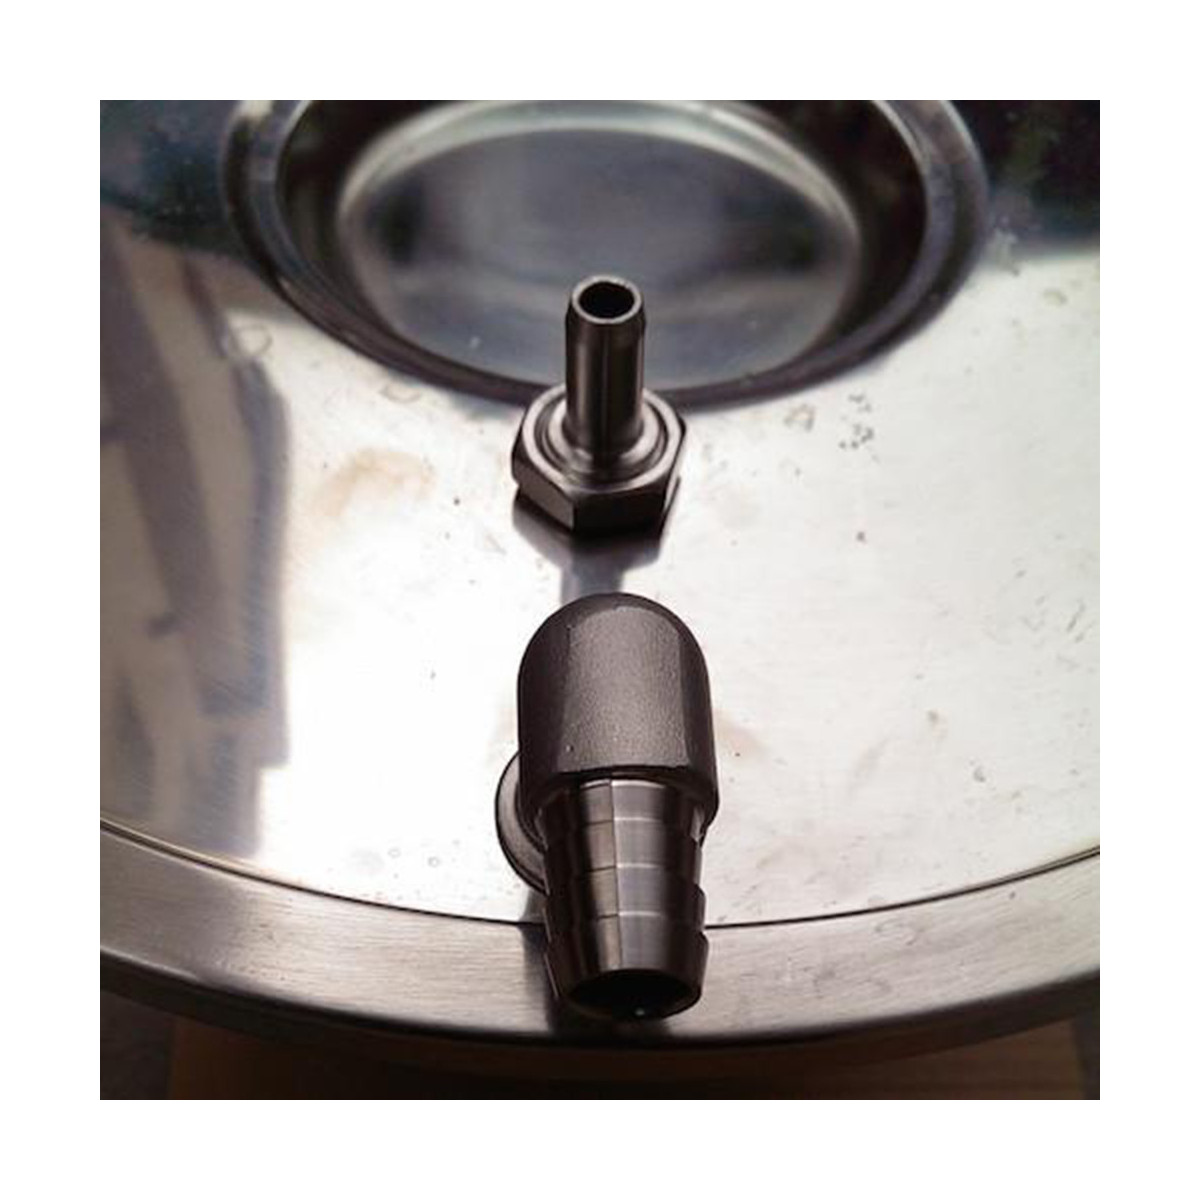 Ss Brewtech™ blow-off barb for FTSs and Brew Bucket lids